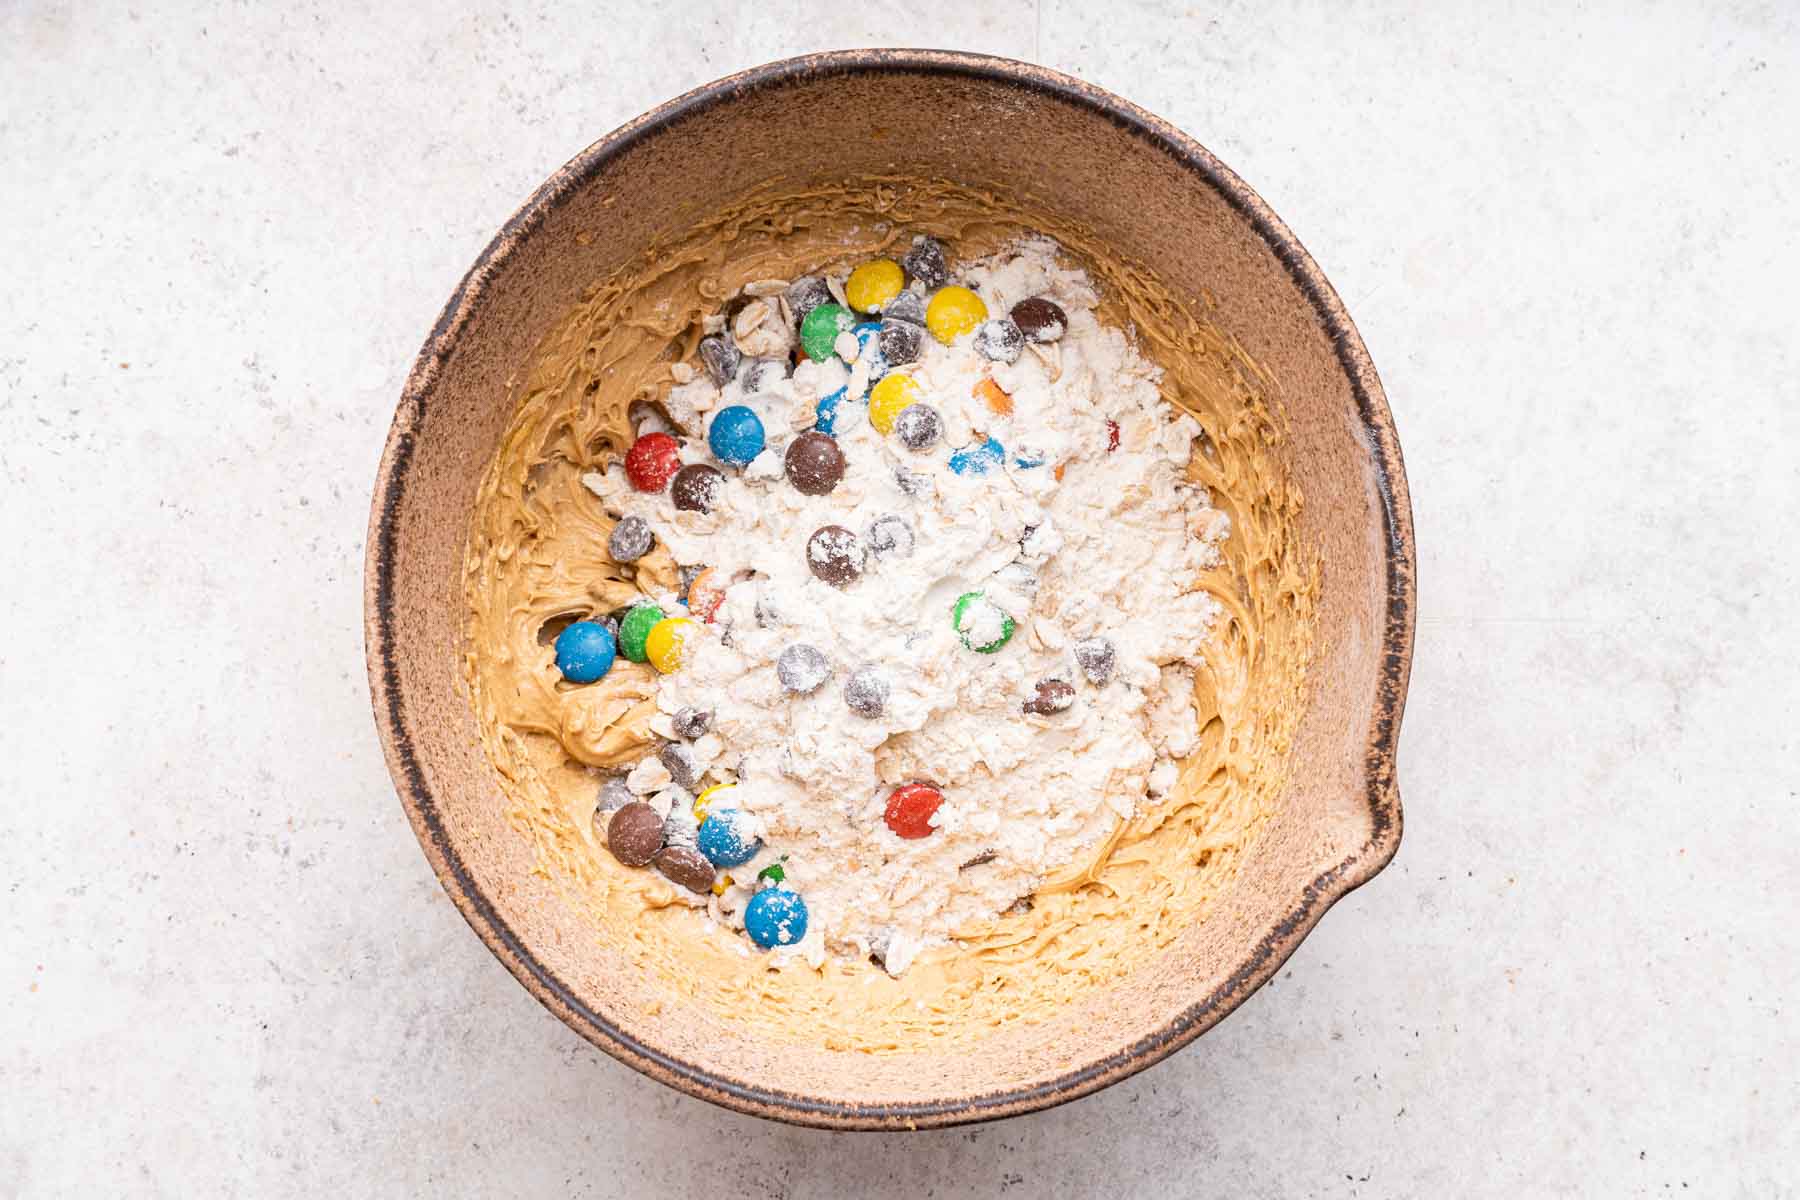 Flour and colorful chocolate candies over dough in mixing bowl.